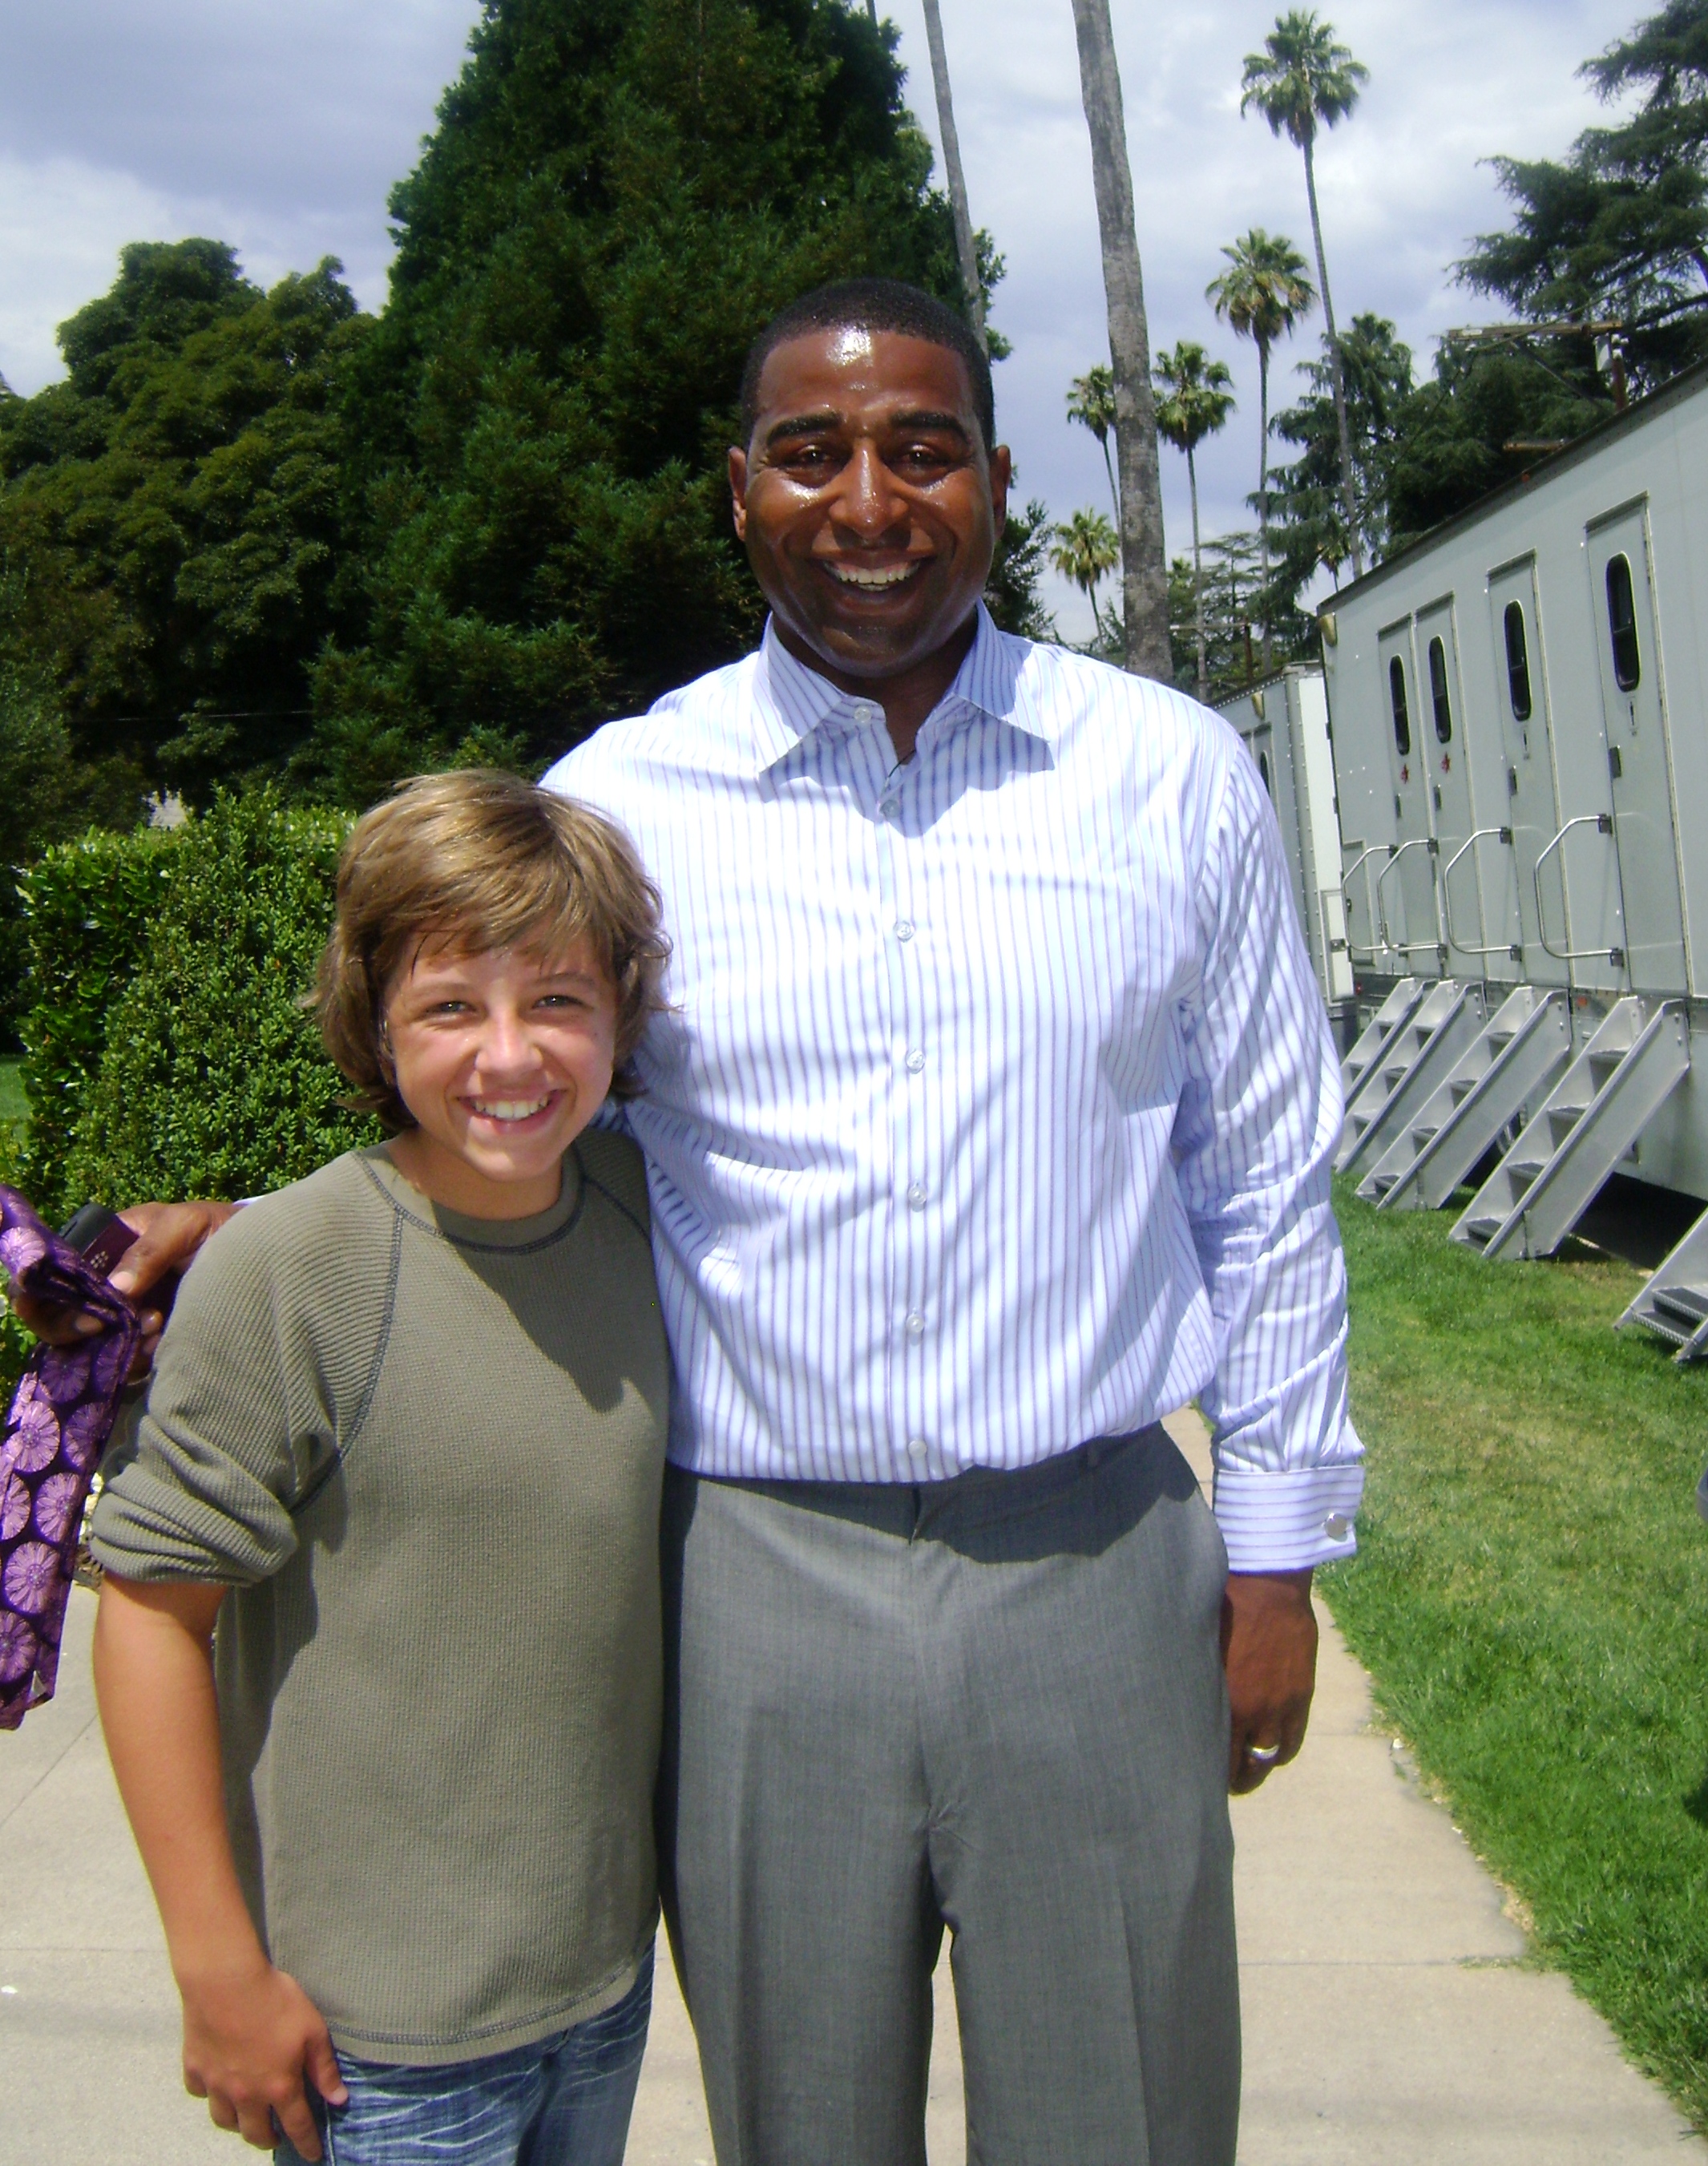 Austin with former NFL Football Player, Chris Carter and current ESPN Analyst, on the set of the ESPN NFL National Commercial